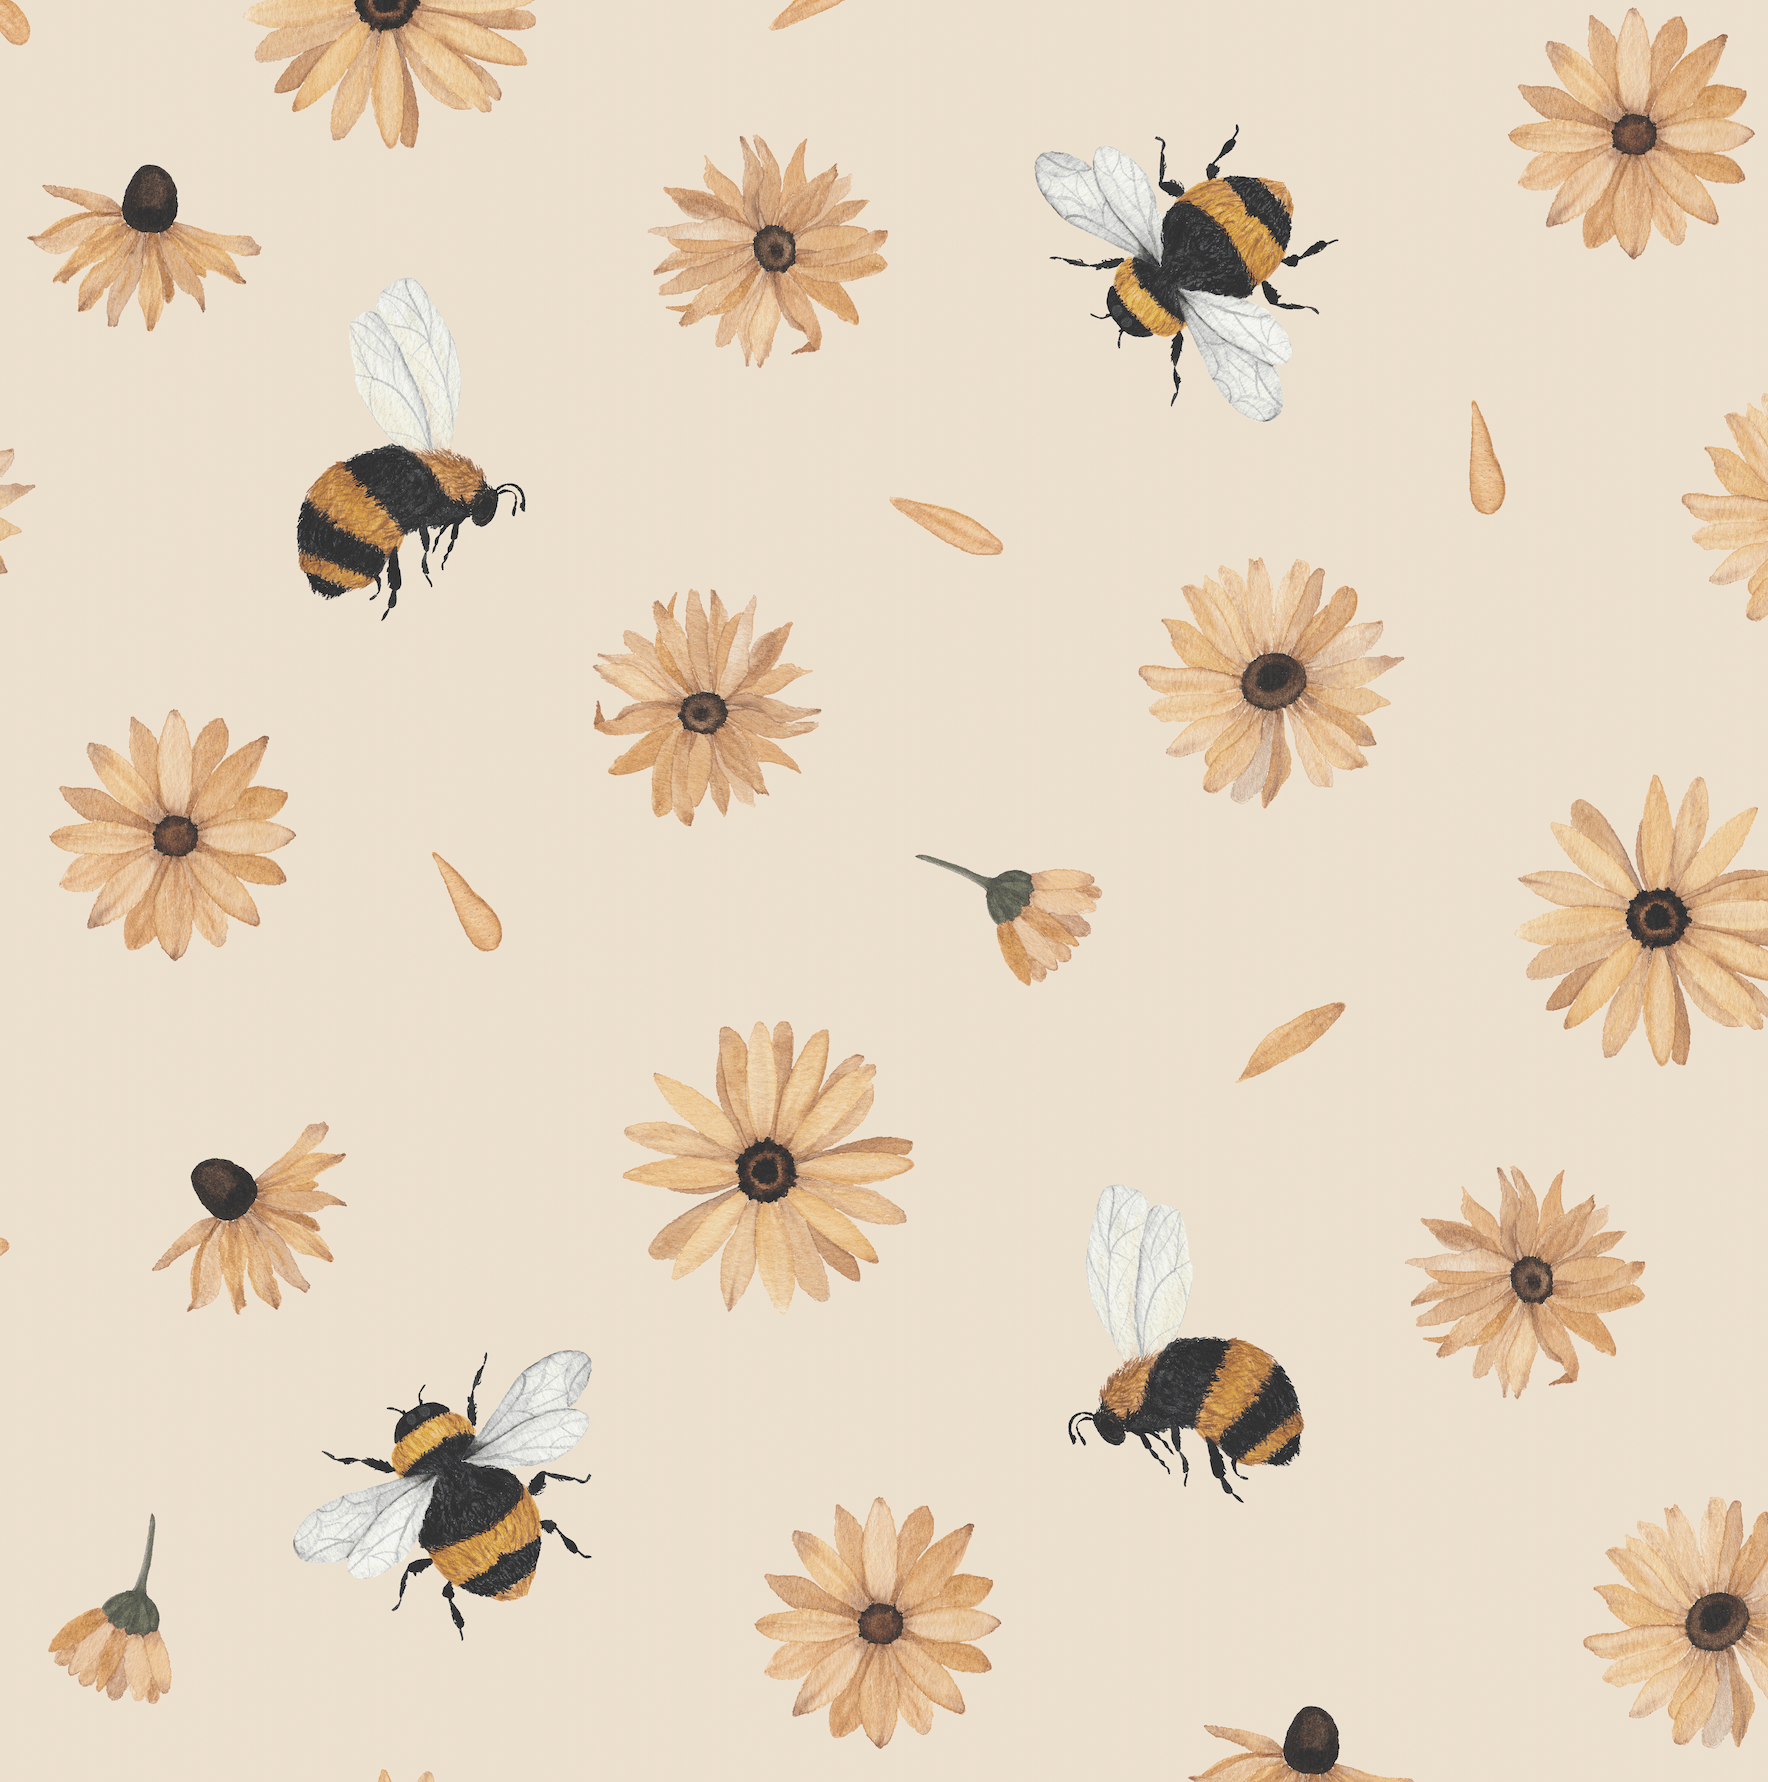 Bees and flowers on a light colored background - Honey, bee